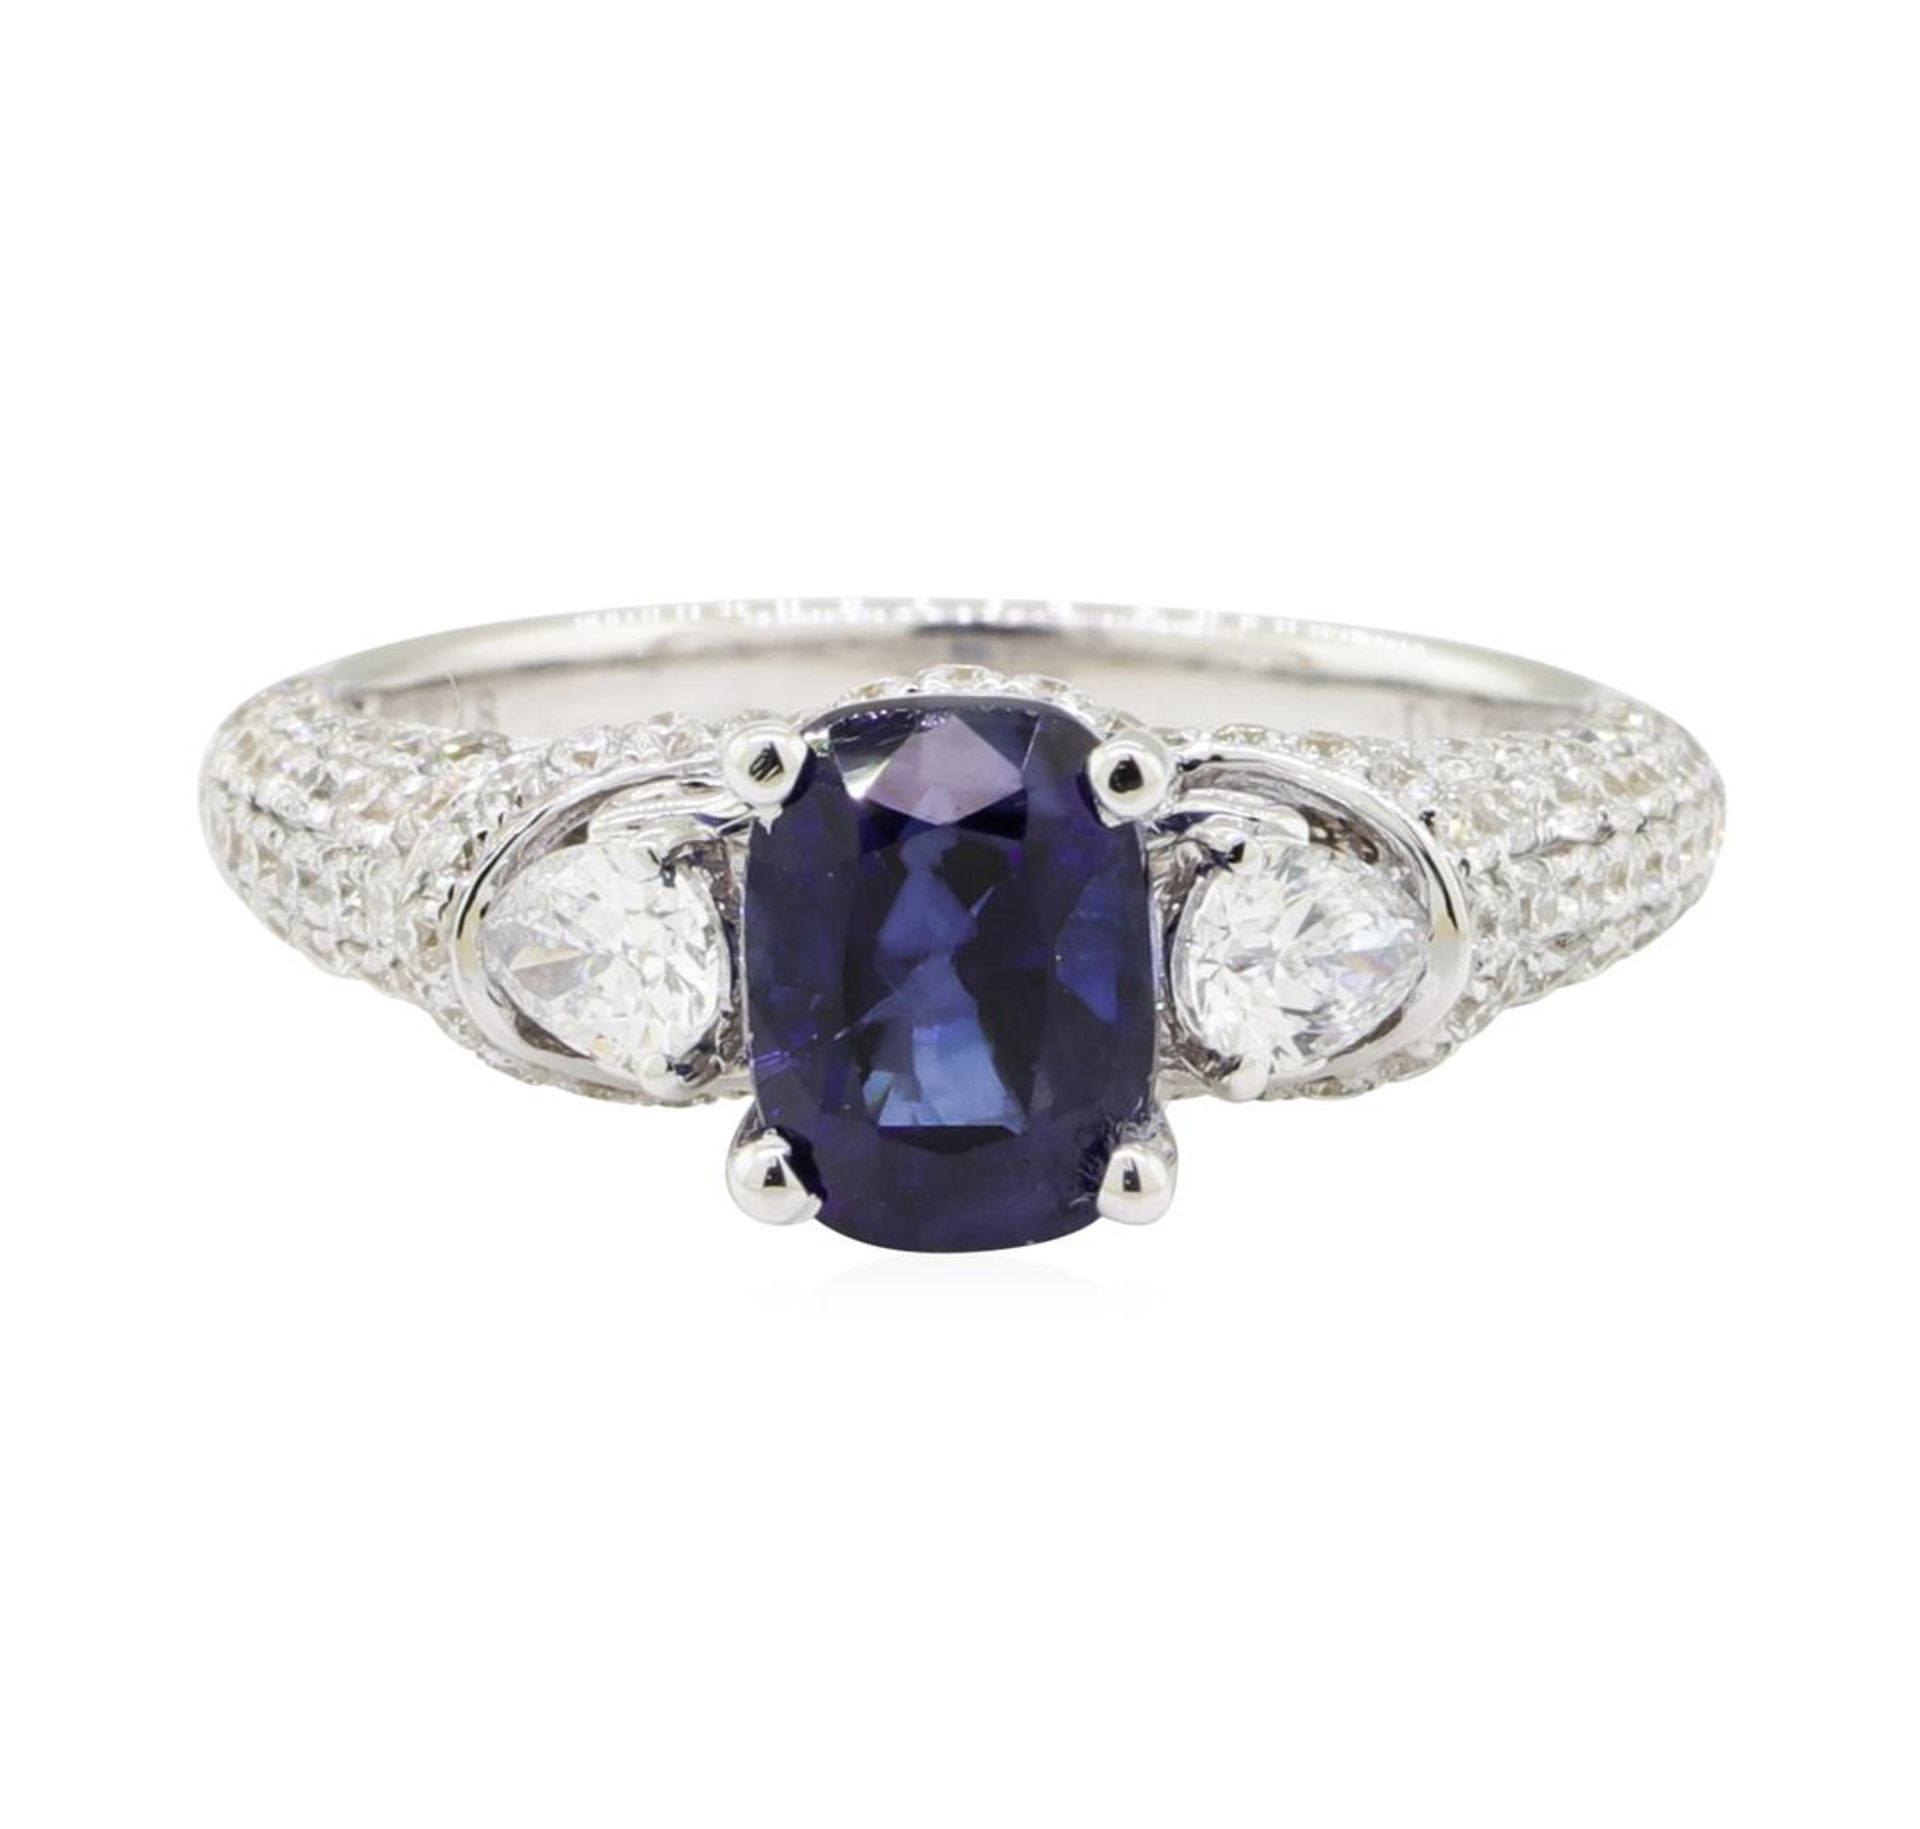 3.02 ctw Colored Stone and Diamond Ring - 18KT White Gold - Image 2 of 5